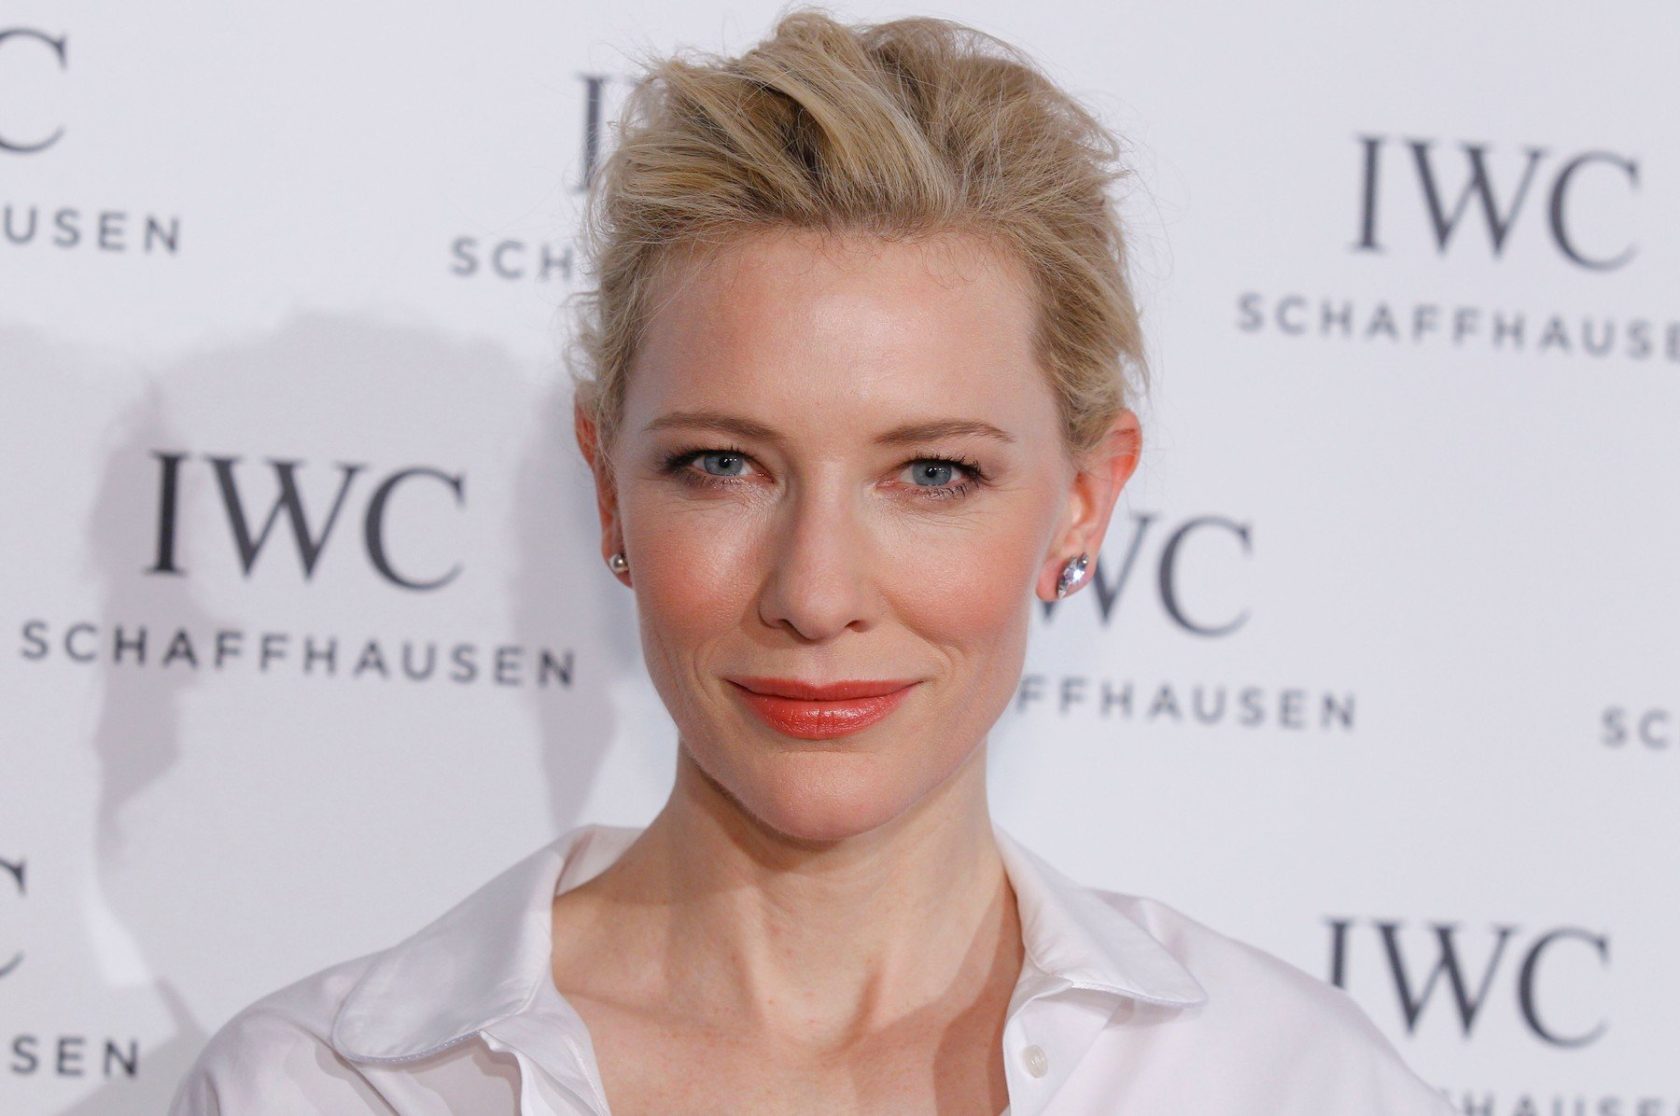 Zurich, Switzerland - September 27, 2014: IWC Schaffhausen VIP Dinner and Photo Exhibition Timeless Portofino with Hollywood Actress Cate Blanchett, Image: 206710635, License: Rights-managed, Restrictions: , Model Release: no, Credit line: Profimedia, DDP